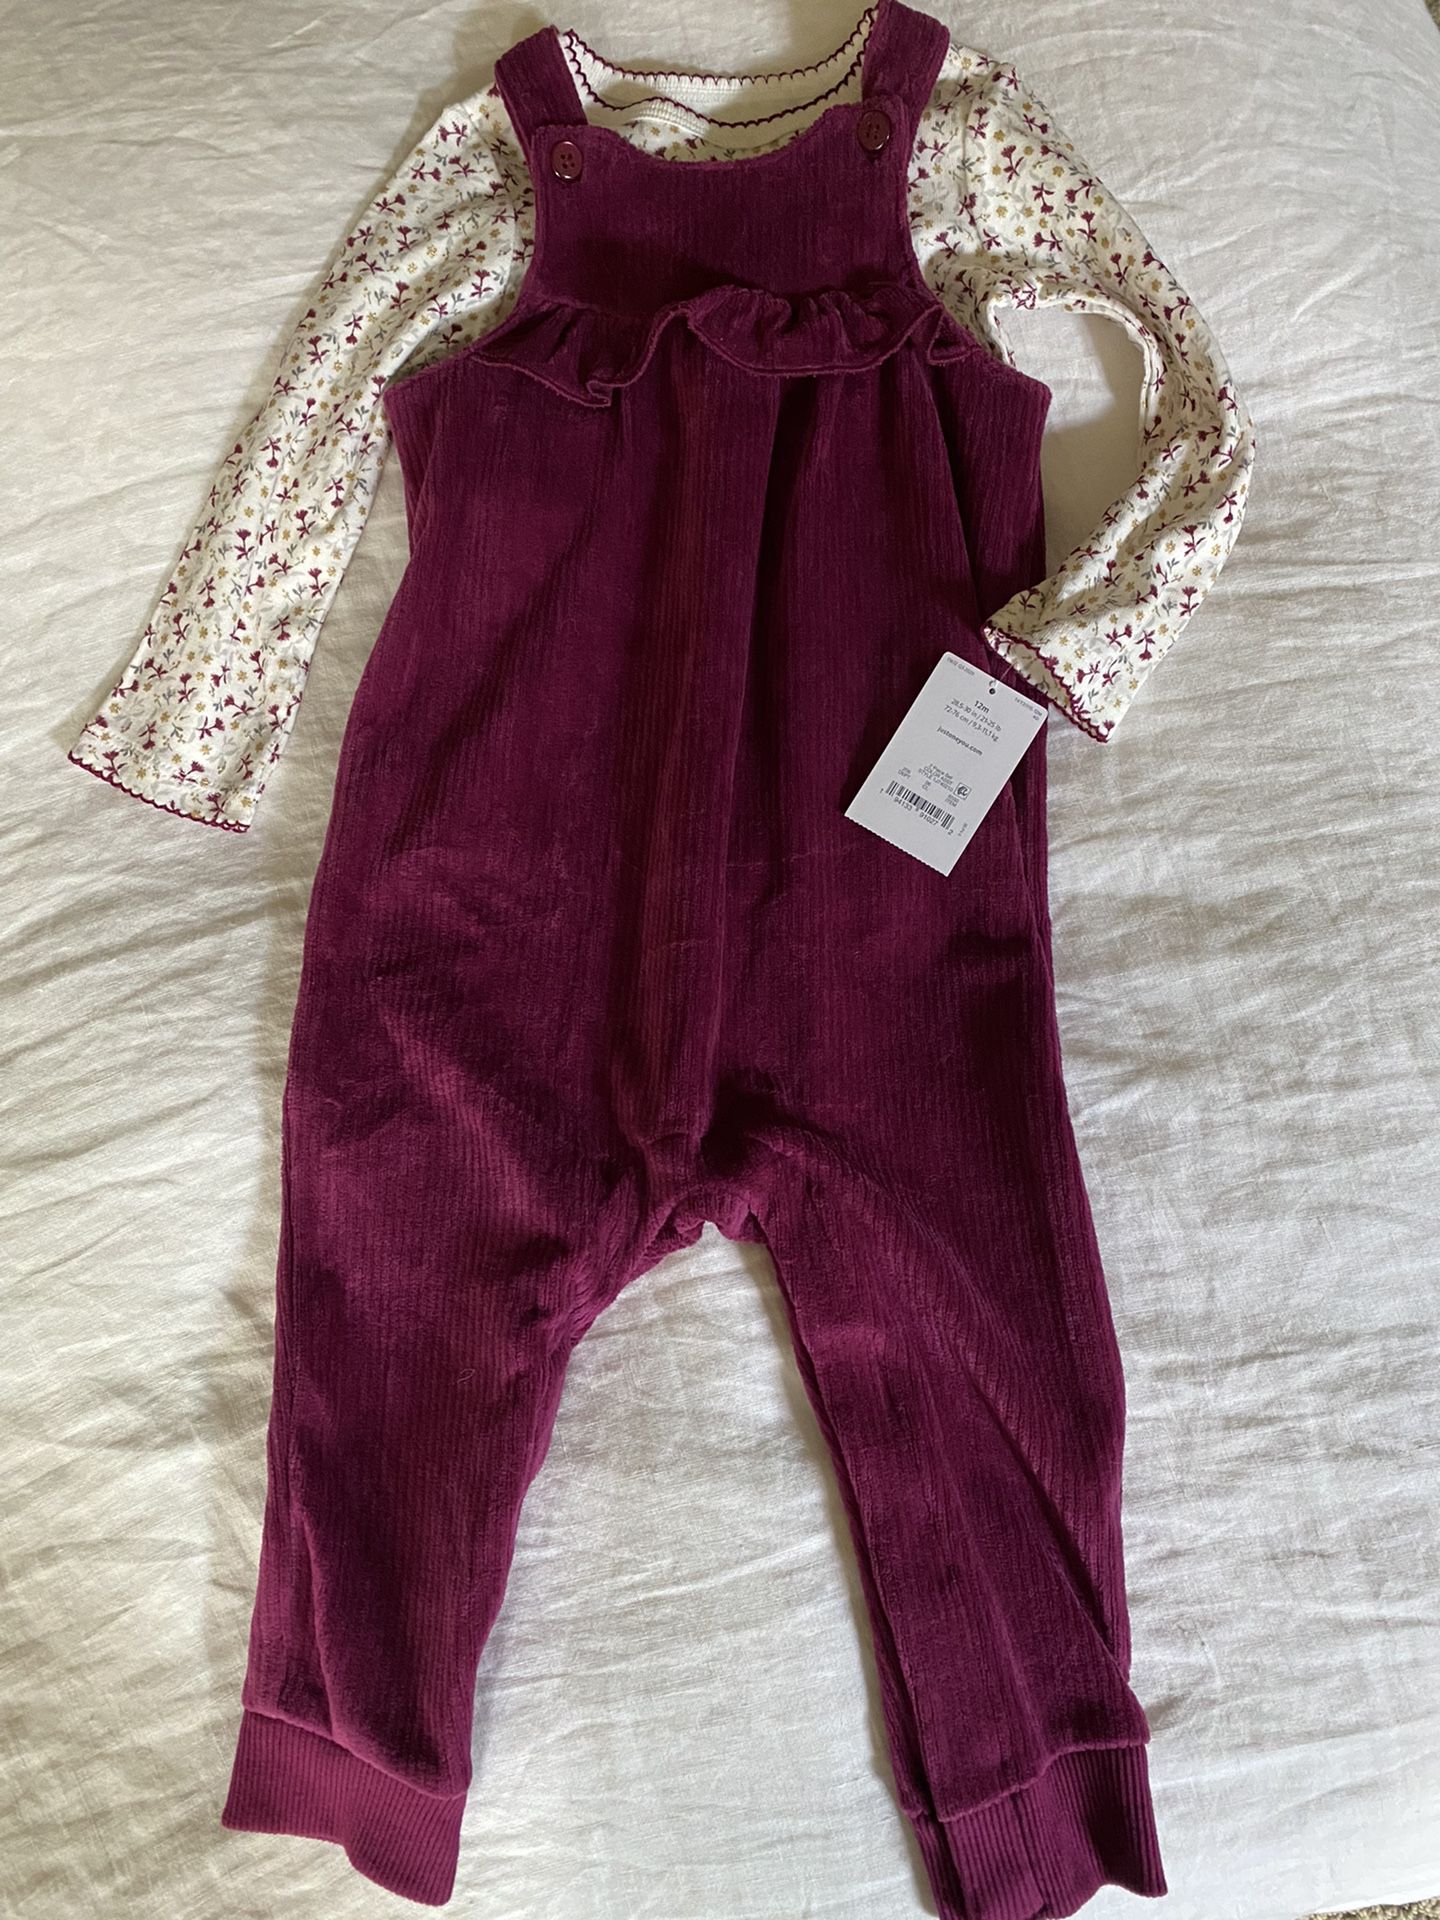 Brand New Carter’s 12mo Outfit